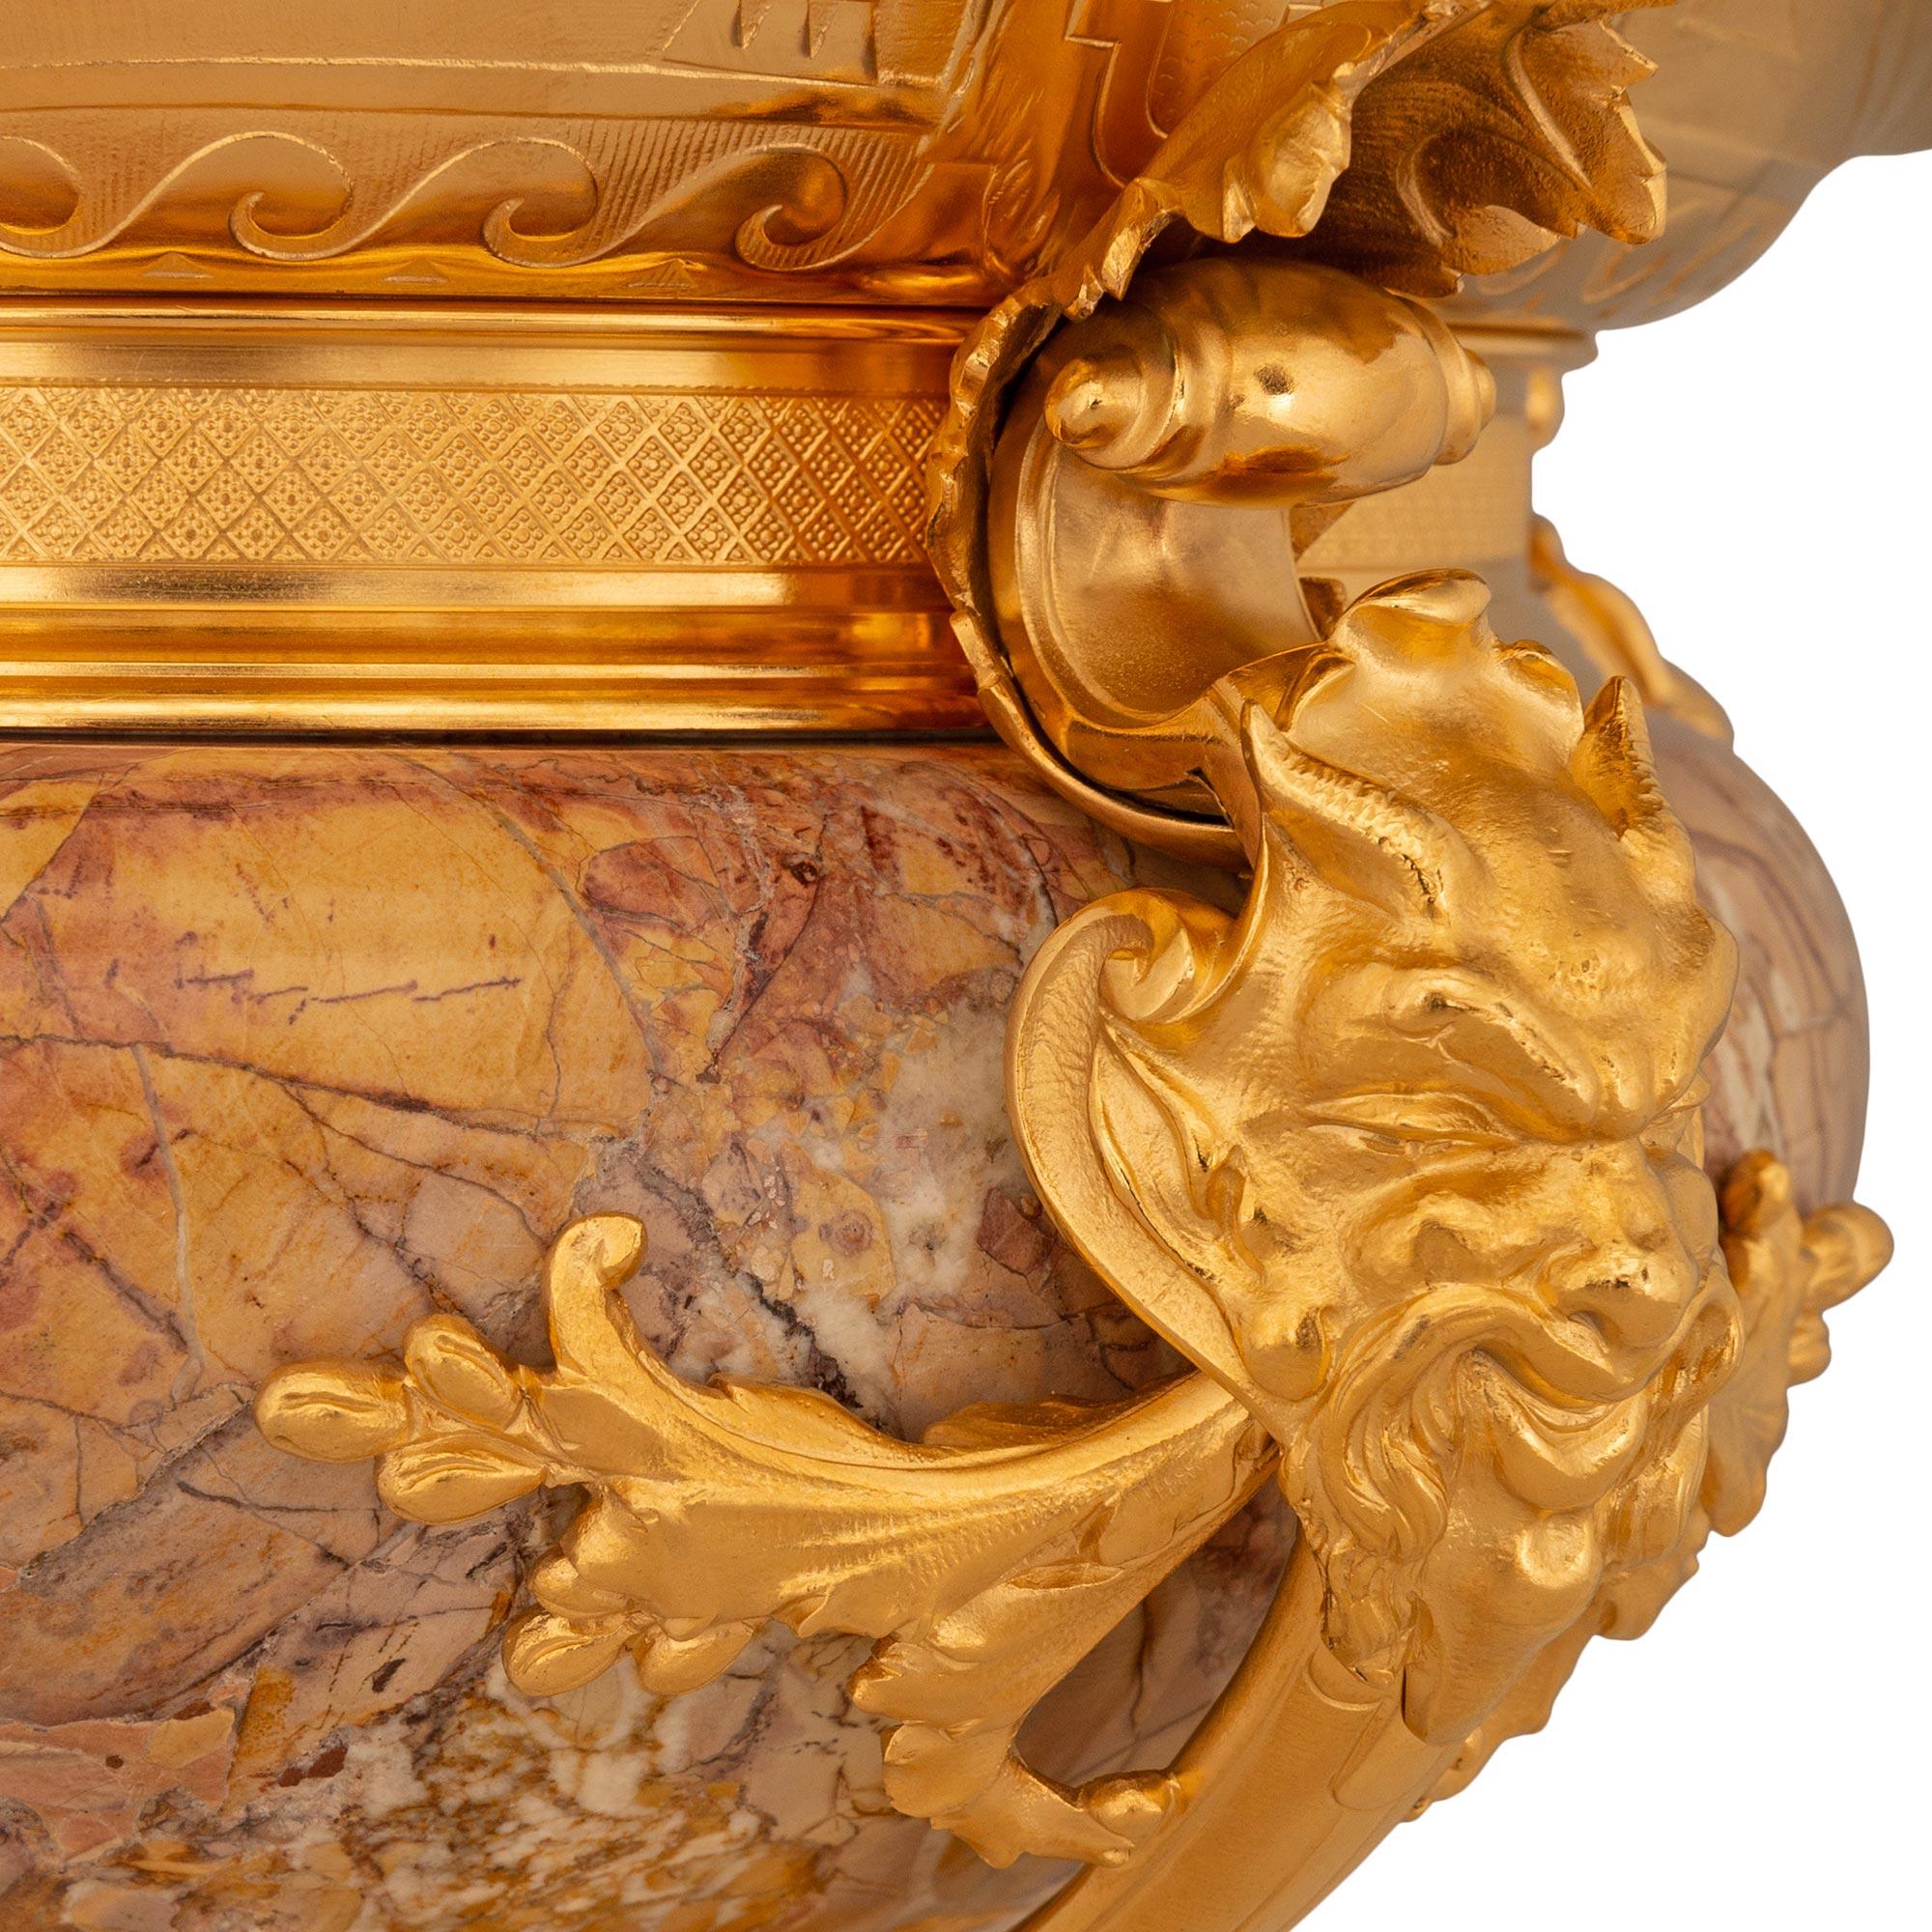 A magnificent and high quality French 19th century Renaissance st. Ormolu and Breccia Nuvolata Rosa marble centerpiece planter. This stunning centerpiece is supported on four cabriole legs with pawed feet. Each leg is connected by a circular reserve